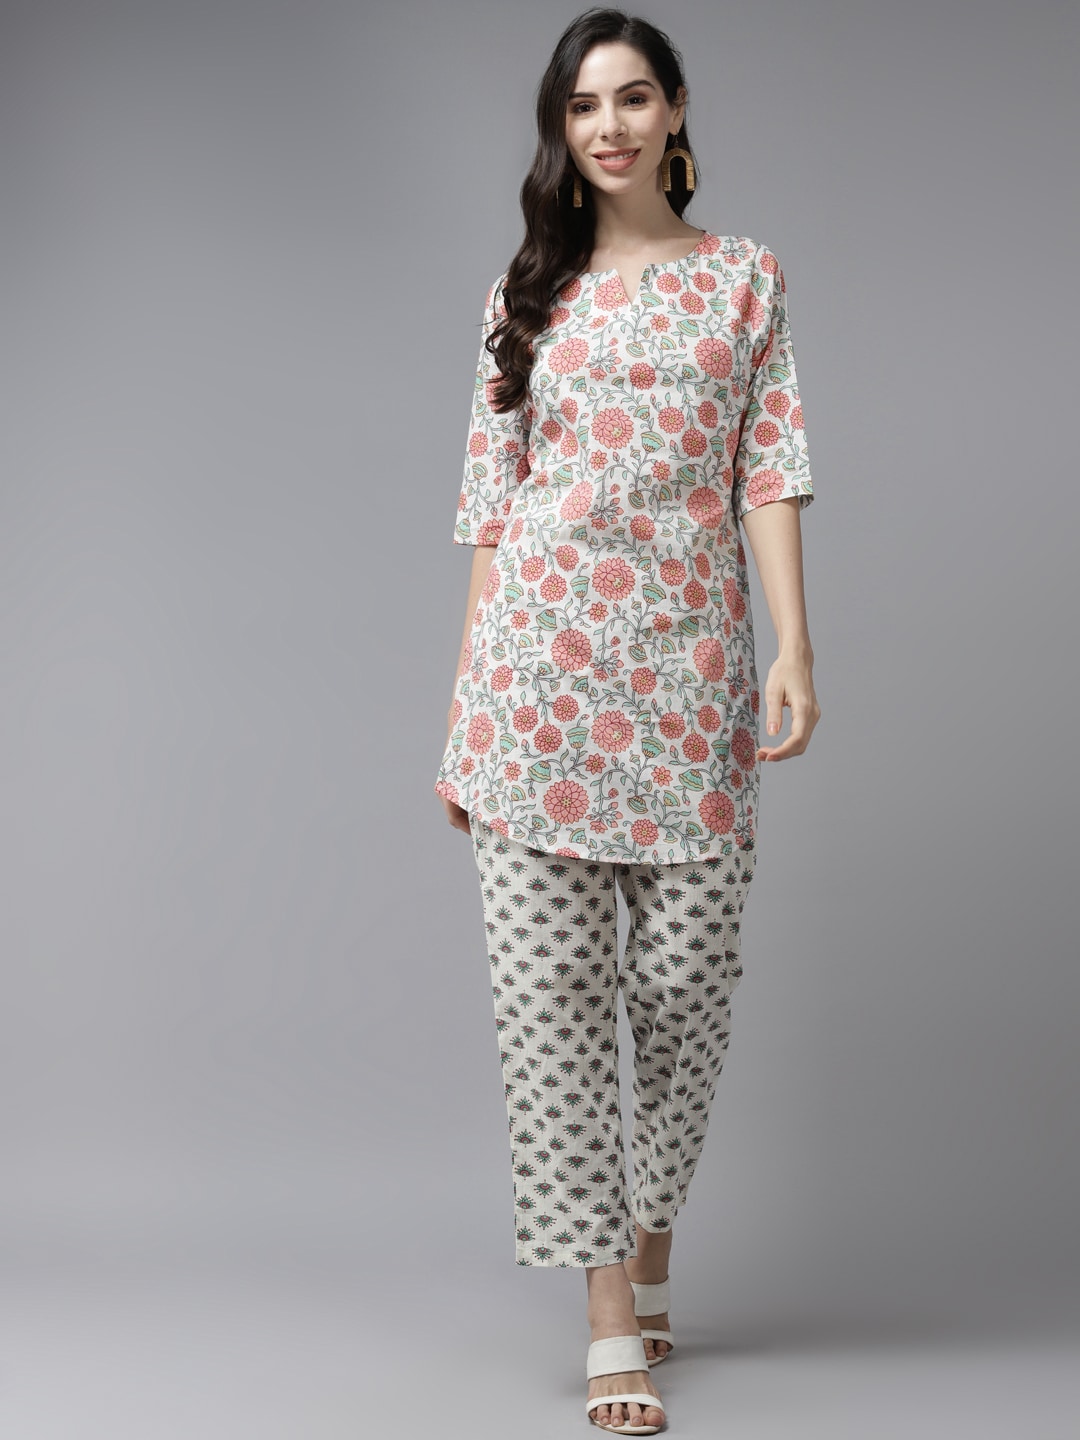 PANIT Women White & Peach-coloured Floral Printed Co-ord Set Price in India